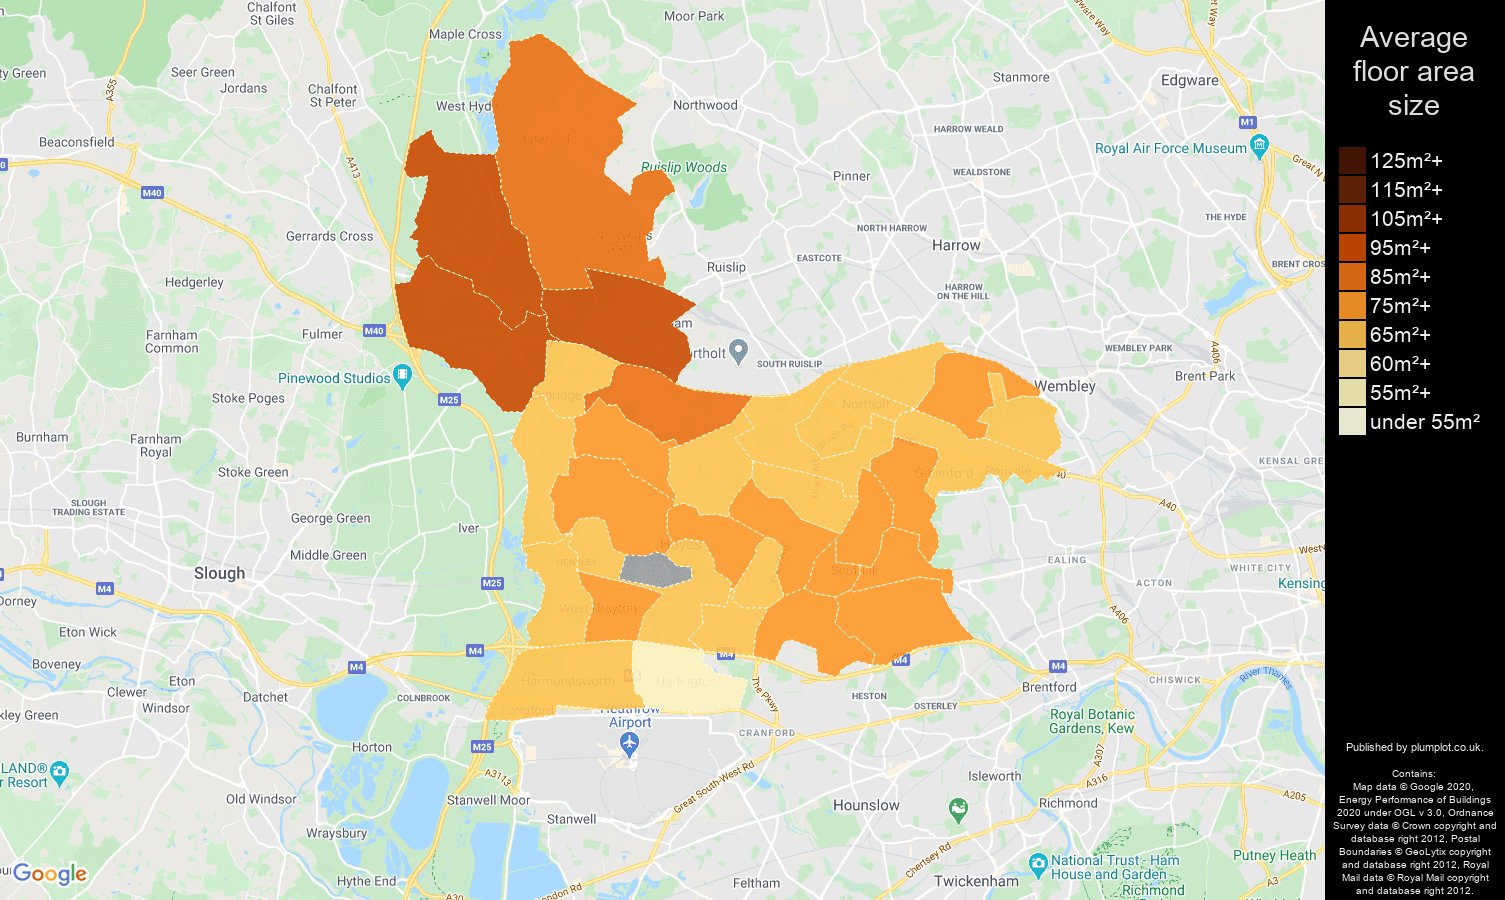 Southall map of average floor area size of properties